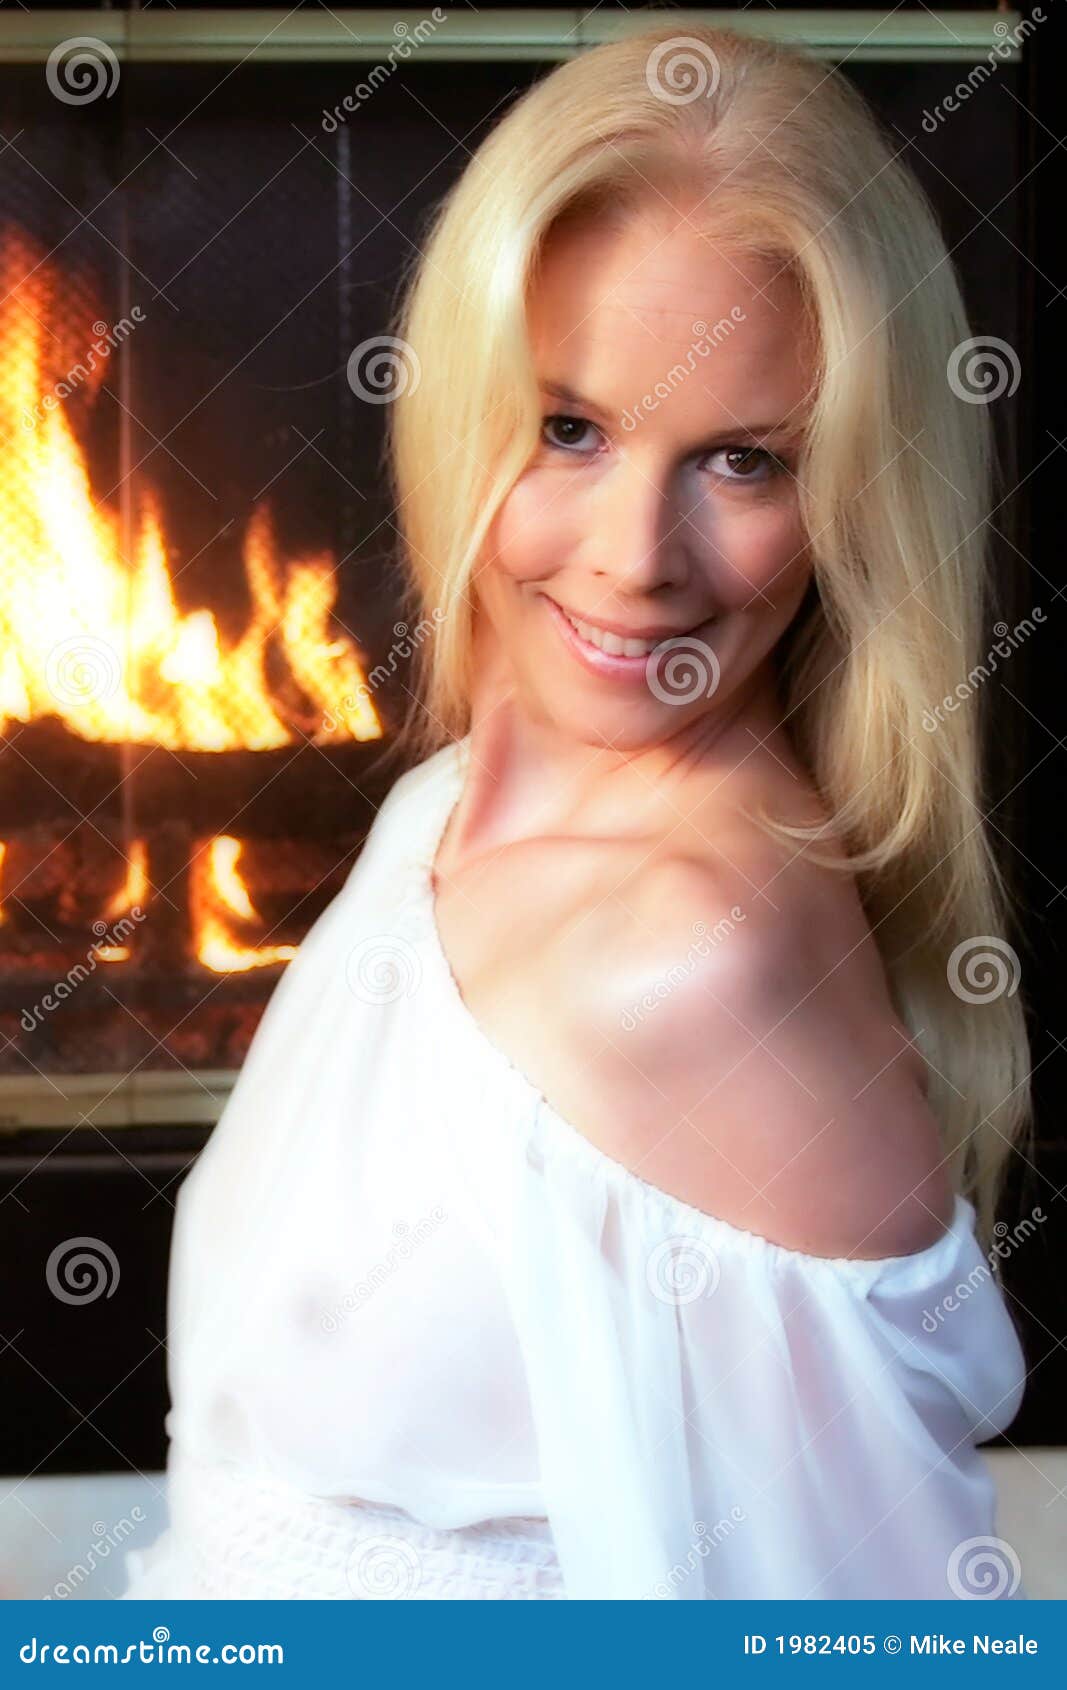 Fireplace Girl Stock Image Image Of Blond Attractive 1982405